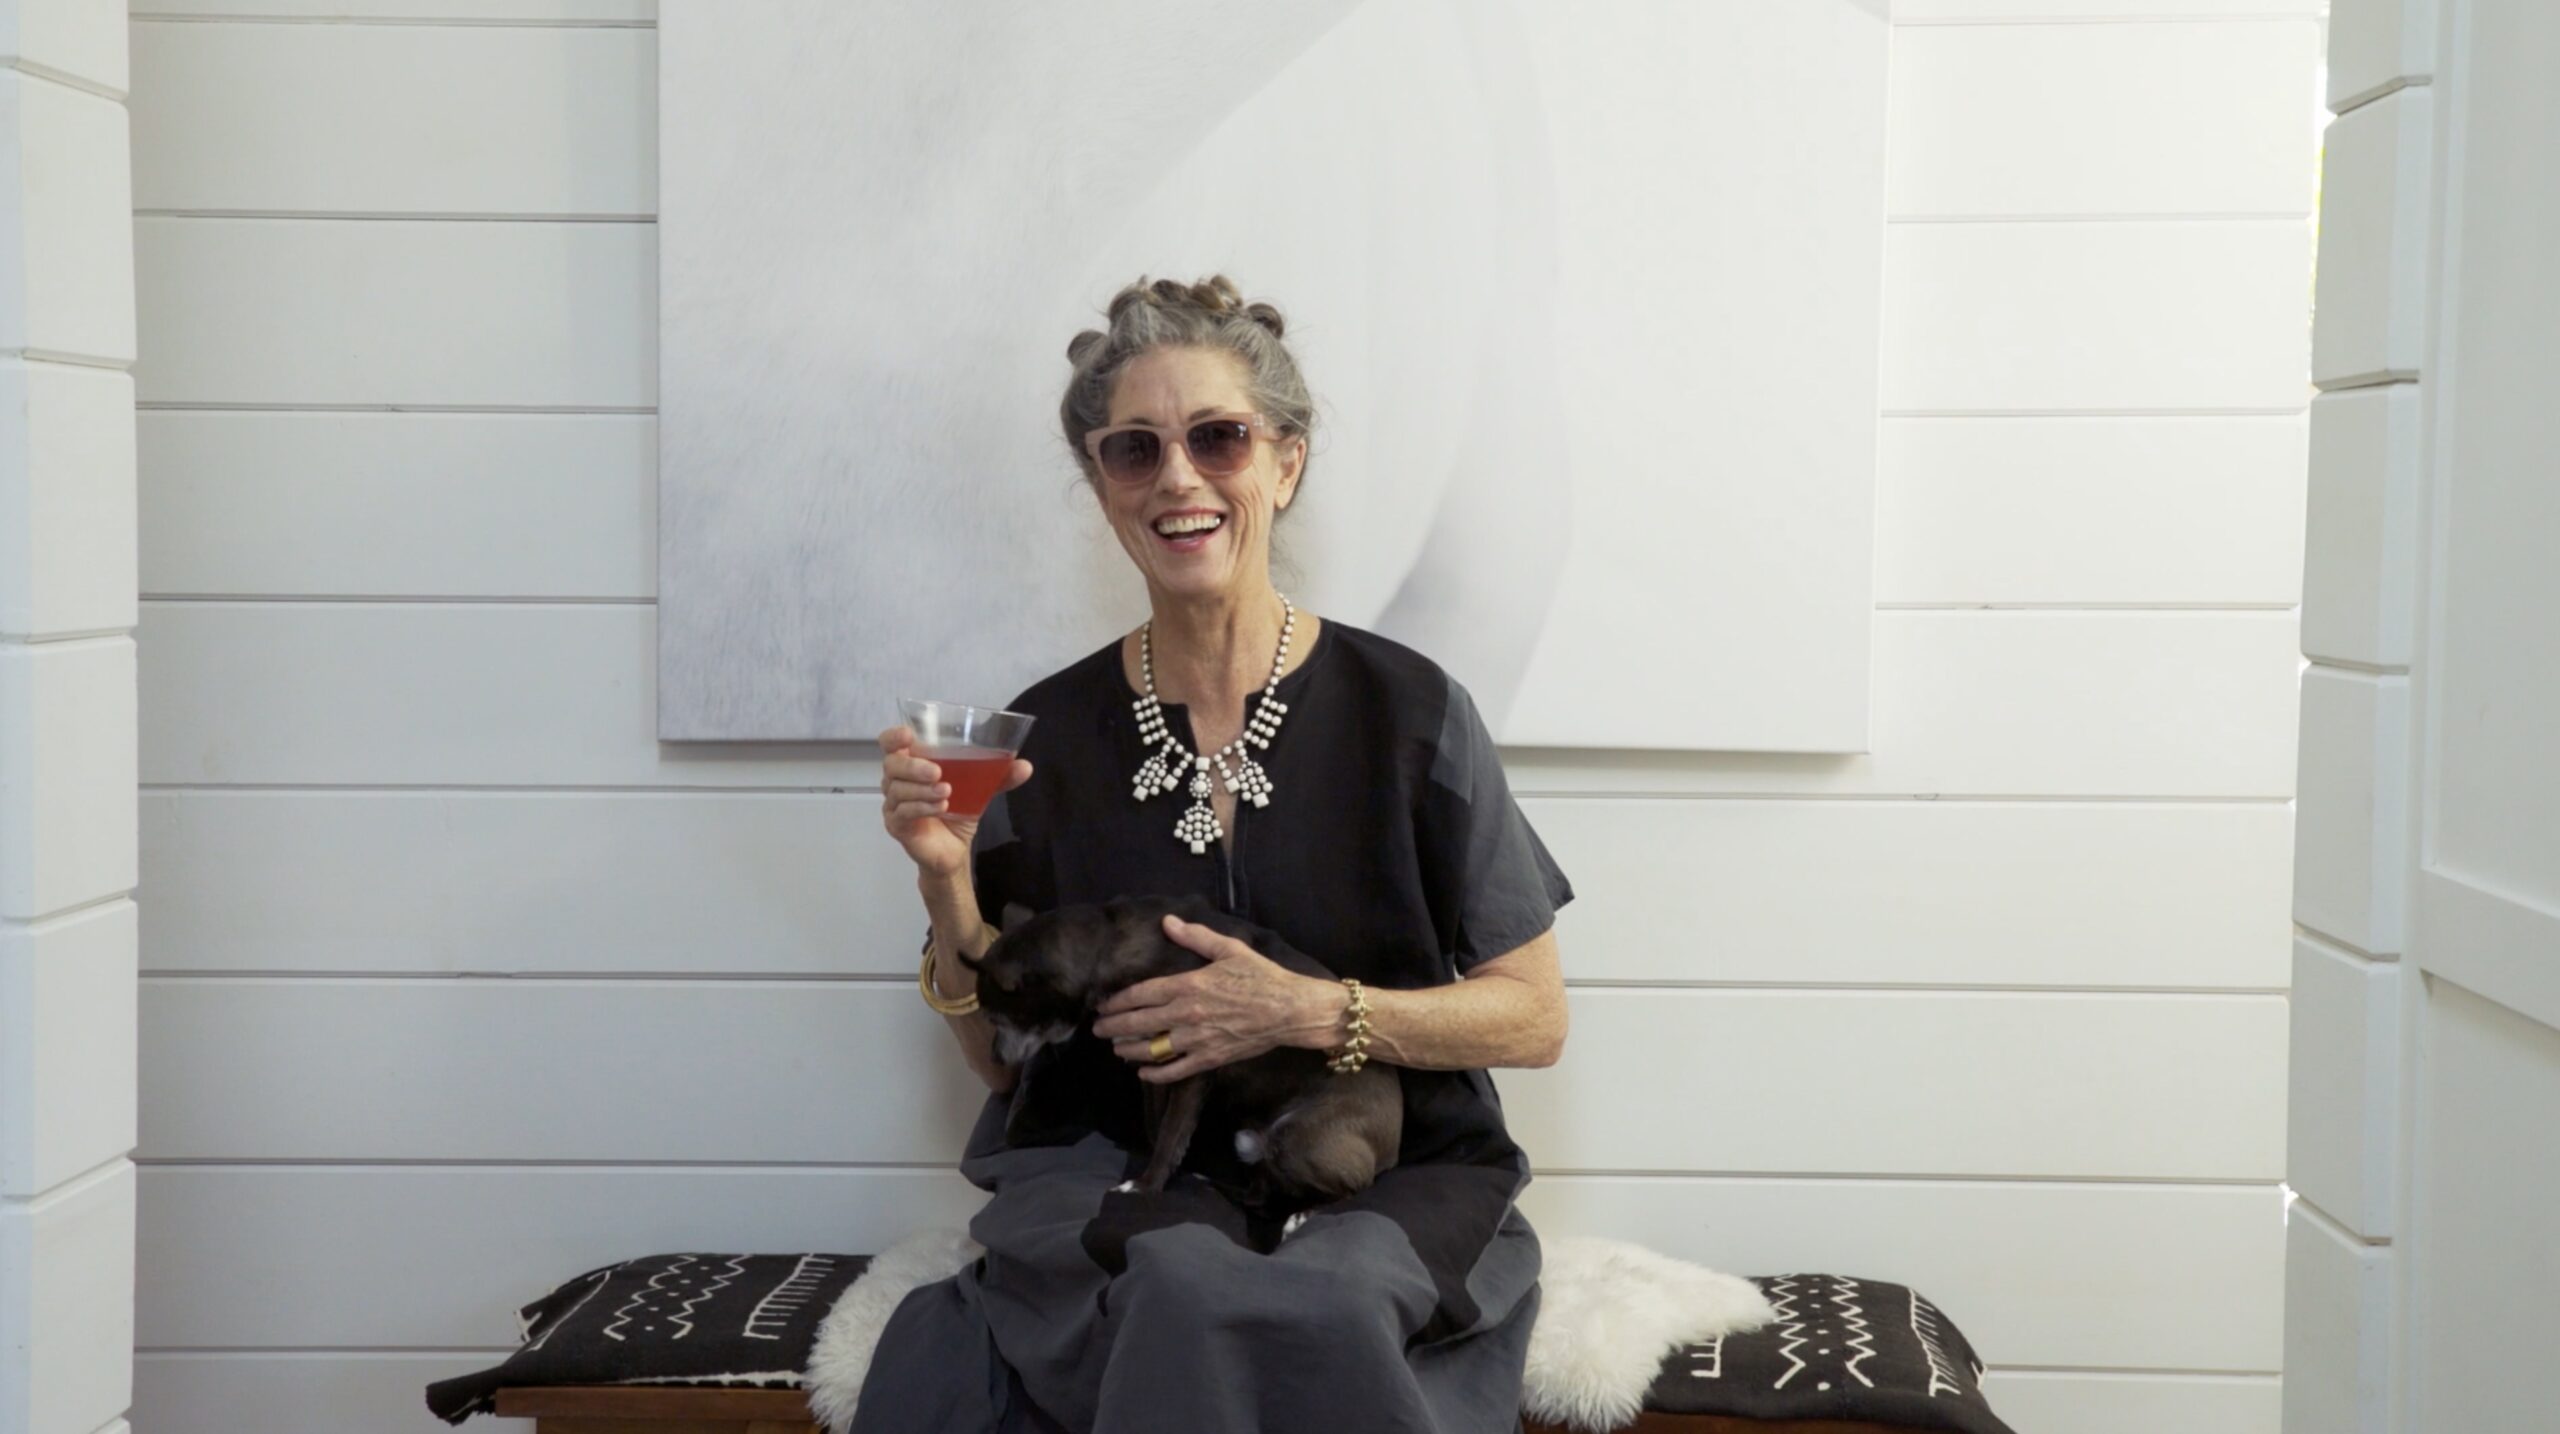 Portrait Of Stylish Senior Woman With Grey Hair At Home With Her Dog